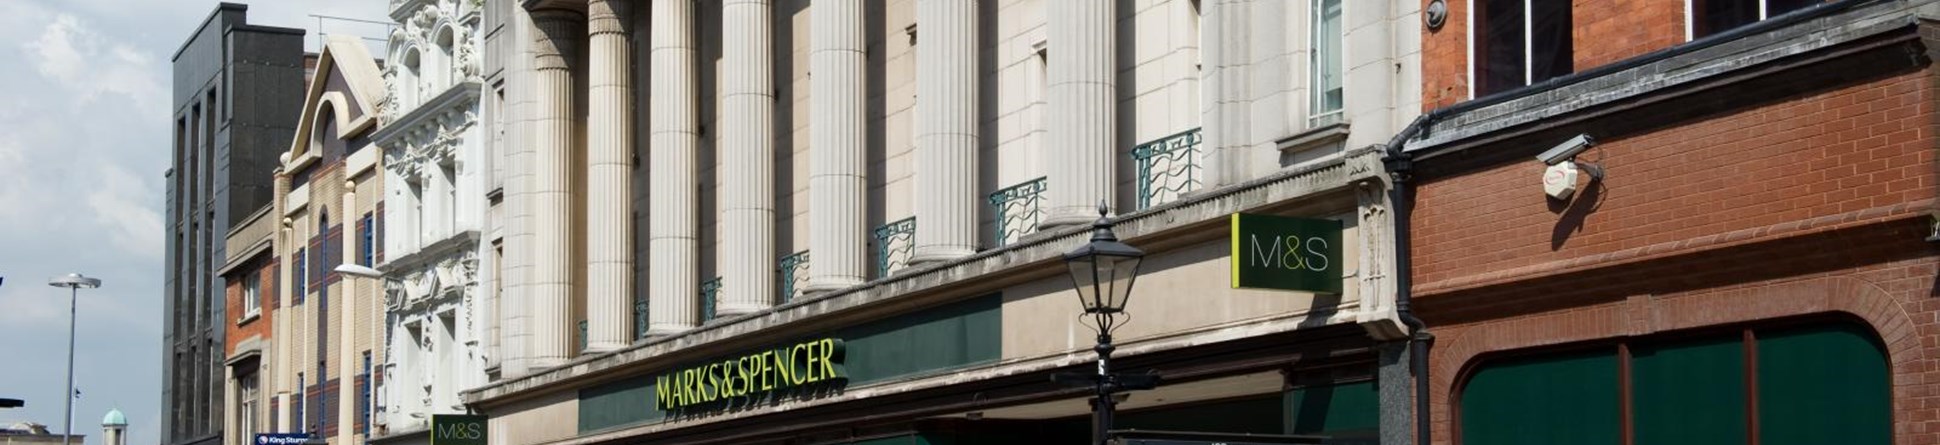 Marks and Spencer building on Whitefriargate, Hull